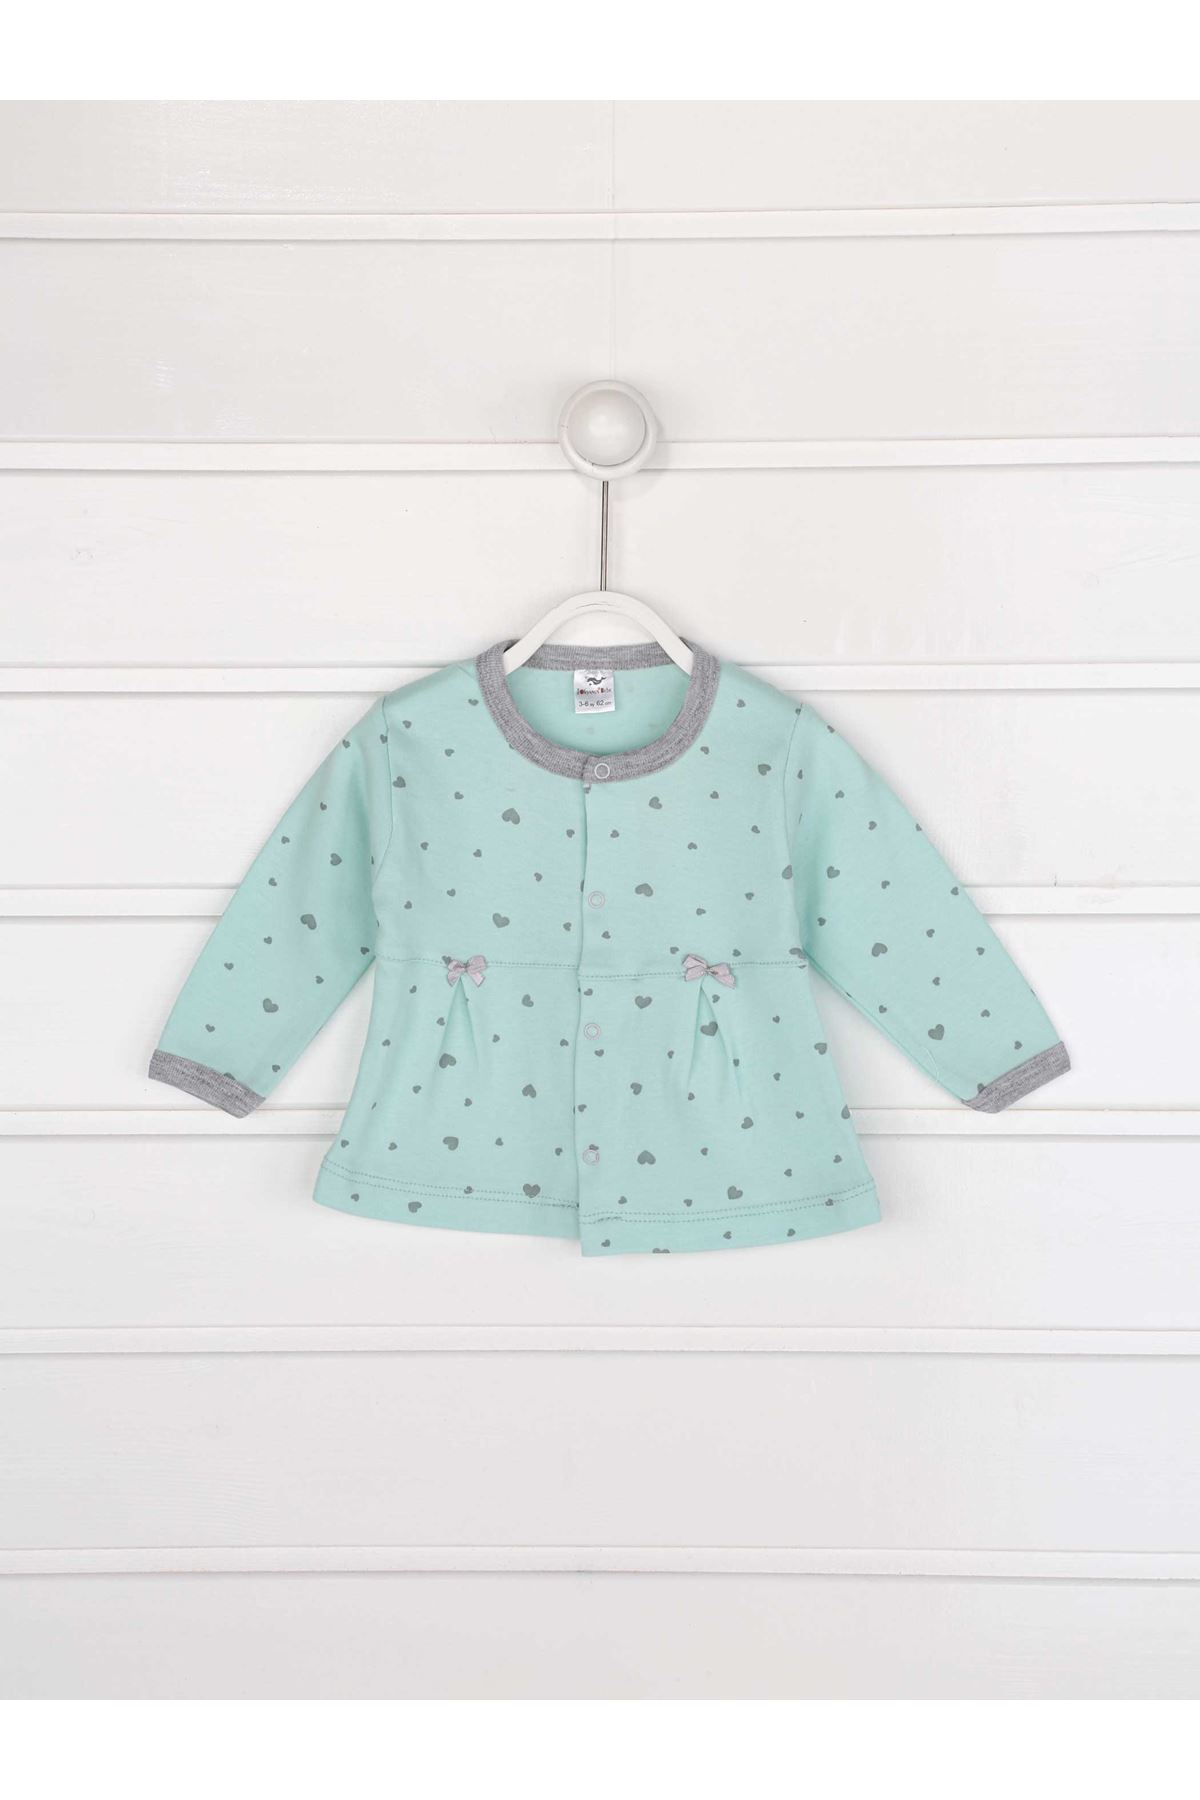 Green Baby Girl Daily 2 Piece Suit Set Cotton Daily Seasonal Casual Wear Girls Babies Suit Outfit Models